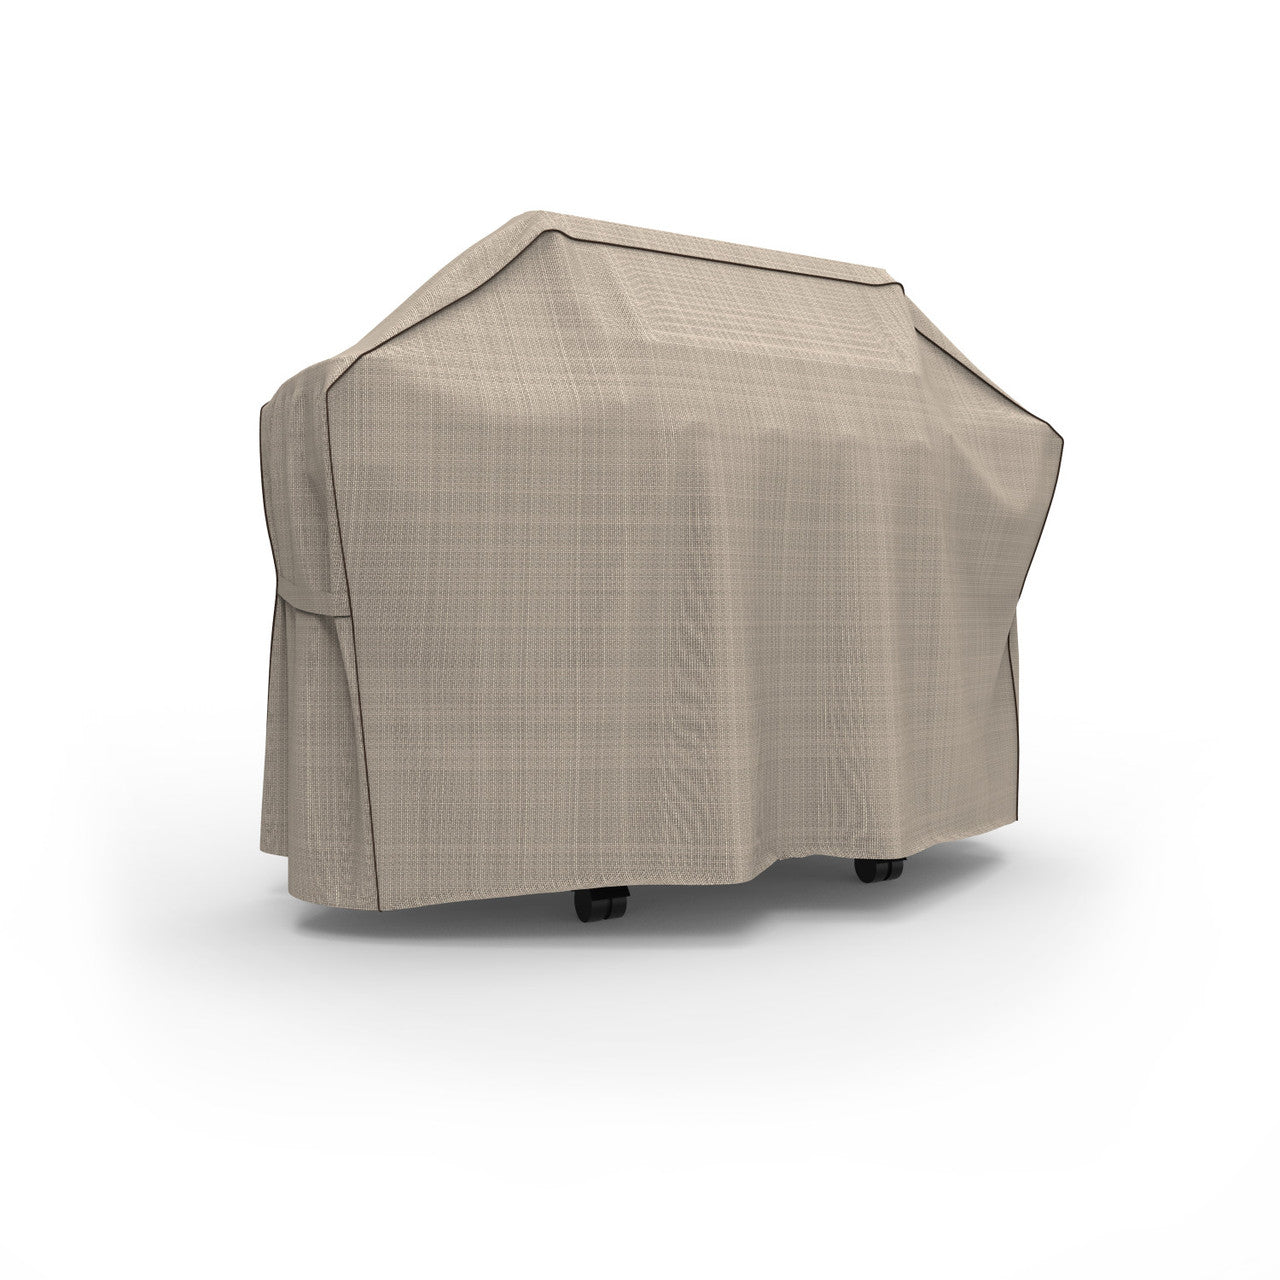 Budge Industries English Garden BBQ Grill Cover